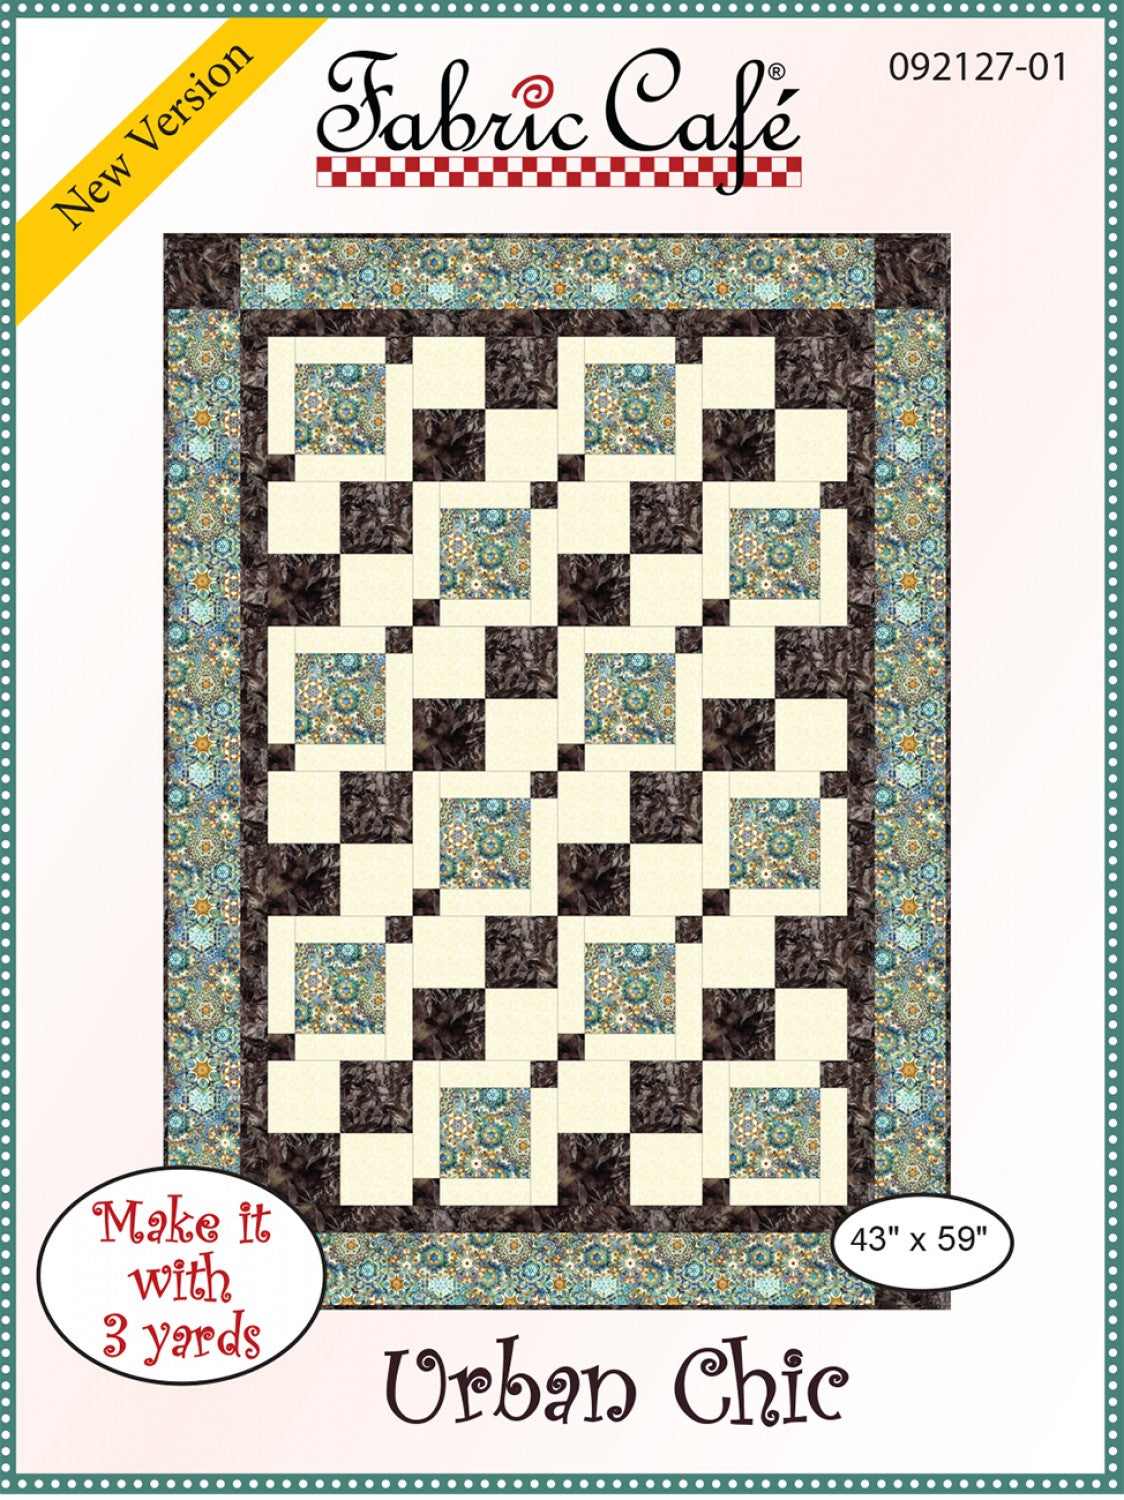 Urban Chic - Quilt Pattern - Fabric Cafe